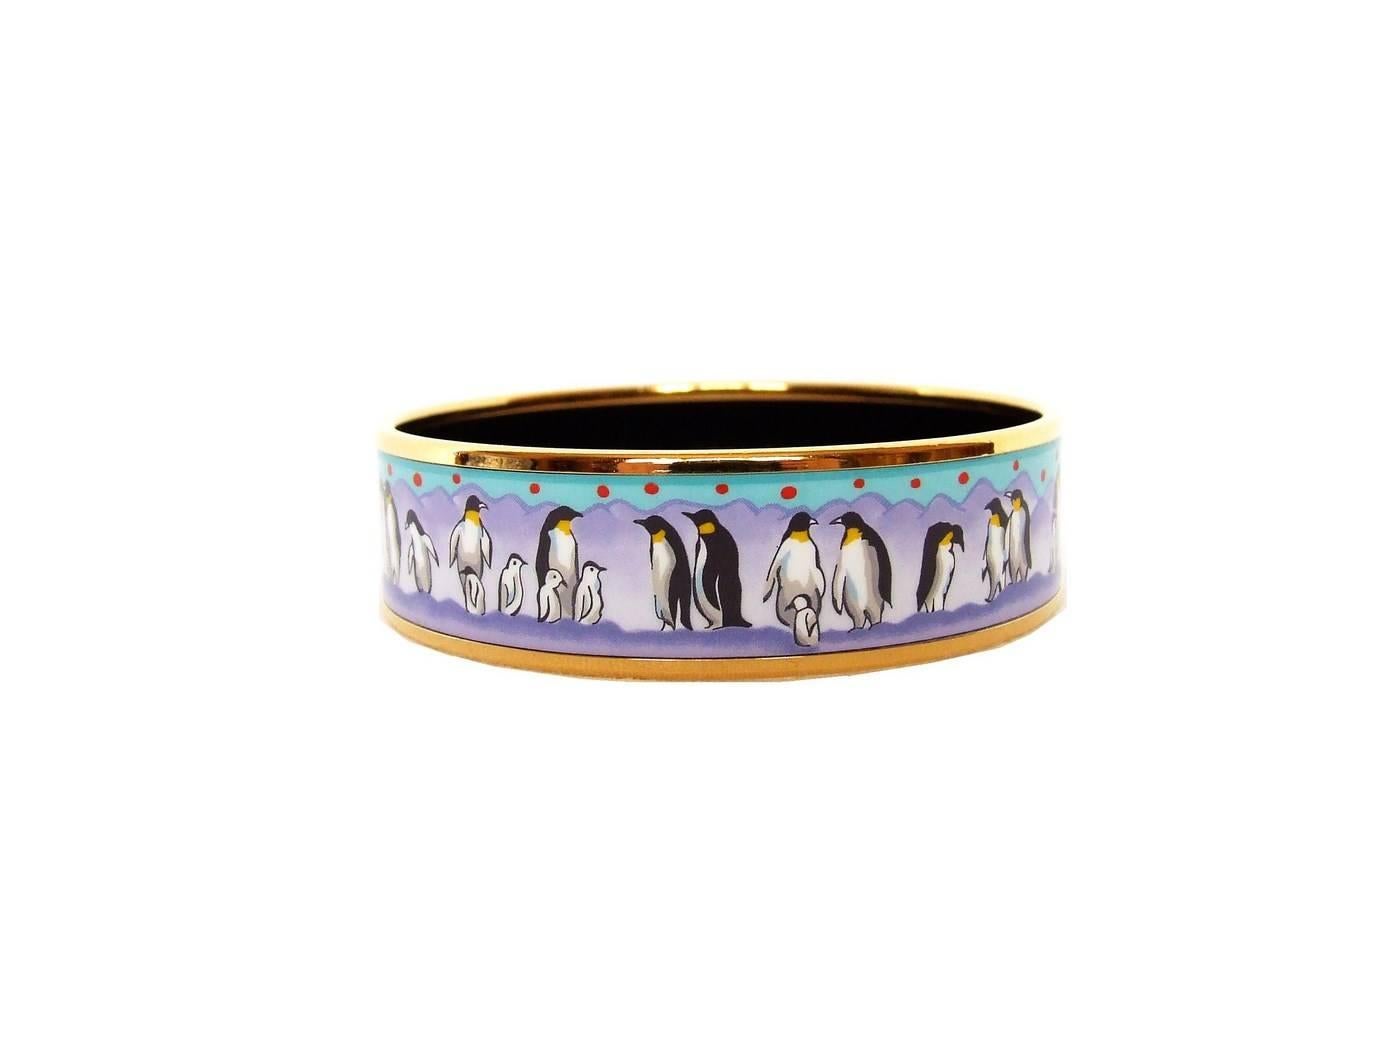 BEAUTIFUL AUTHENTIC HERMES BRACELET

Pattern: Penguins on the ice

RARE bracelet, hard to find !

Made in Austria + E (enamel is made in France since a short time)

Made of Enamel and Gold Plated Hardware

Colors: Purple, Blue, Red polka